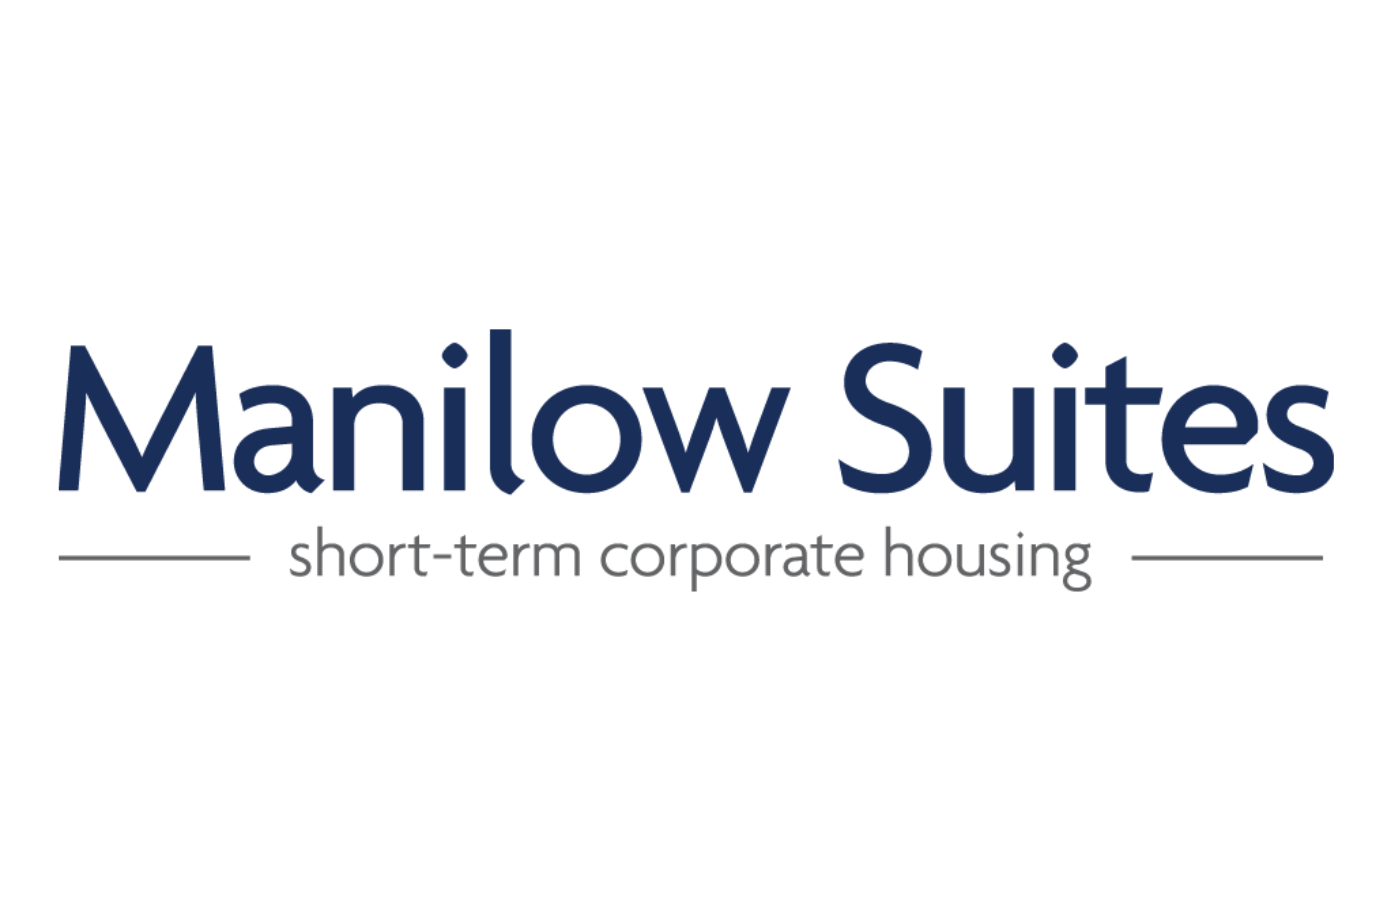 Manilow Suites Partners with Iconic Chicago Companies